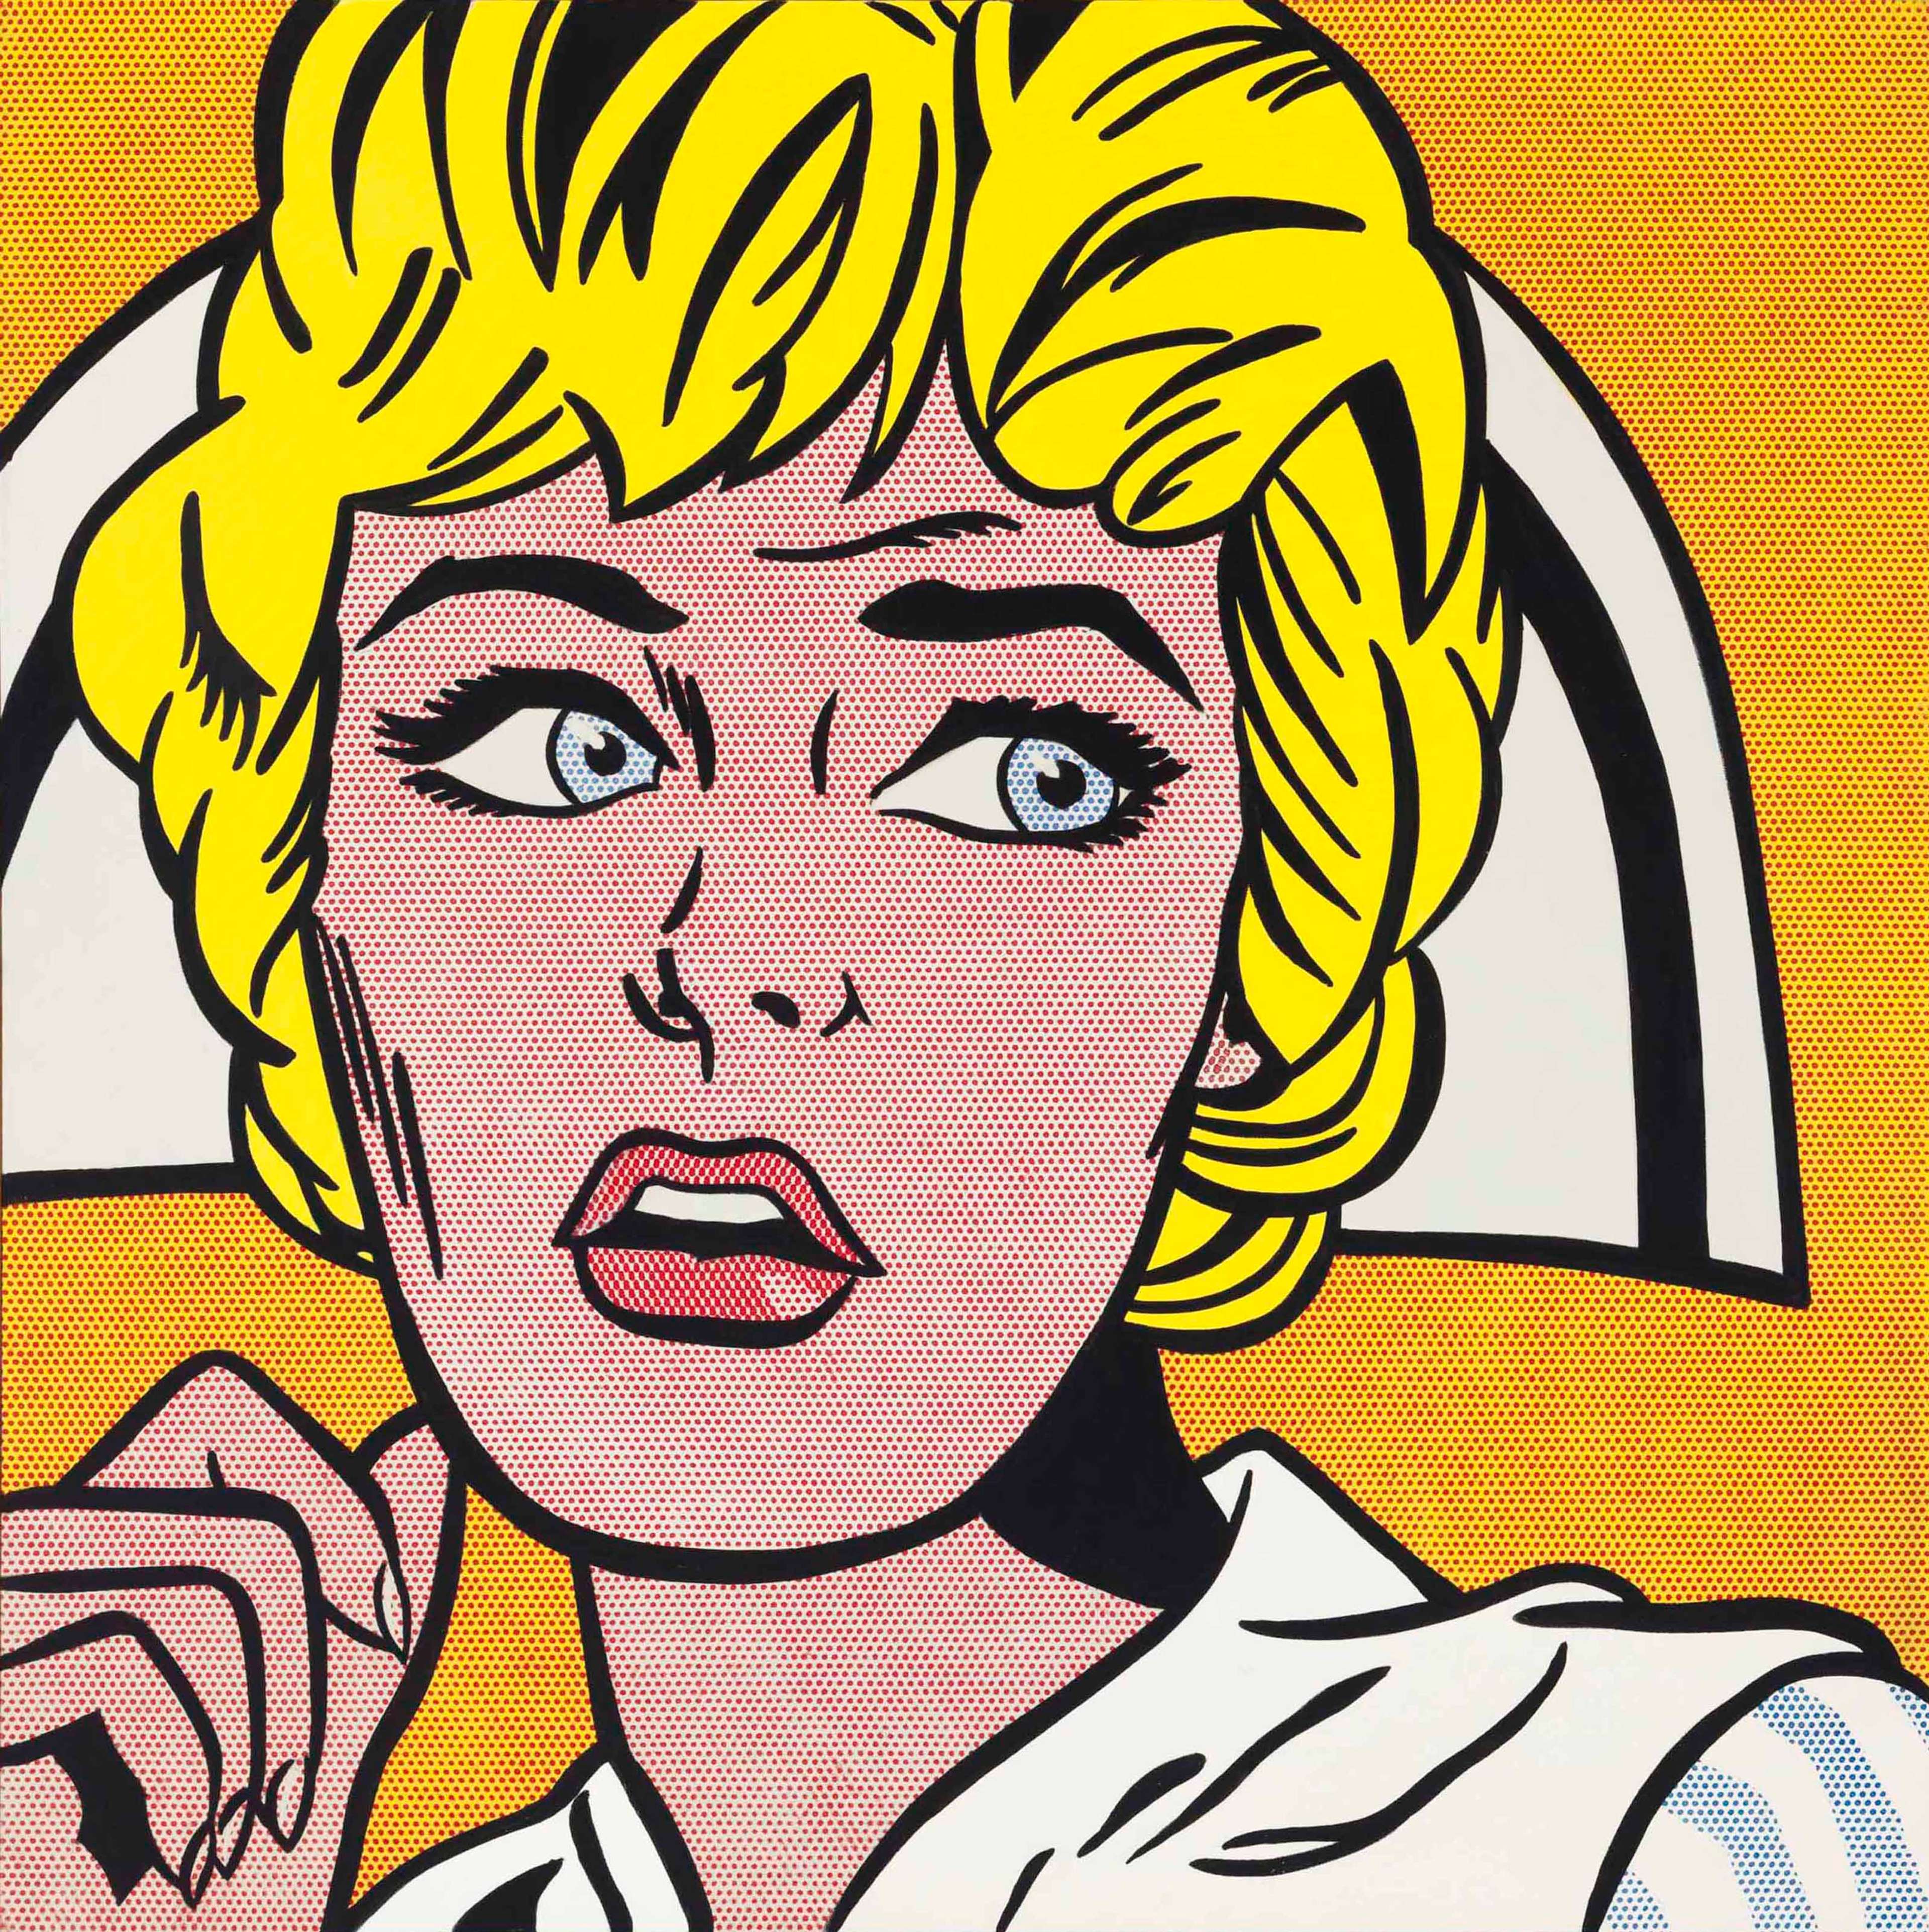 Roy Lichtenstein's Ladies: The Drowning Girl, The Crying Girl and The Anxious Girl